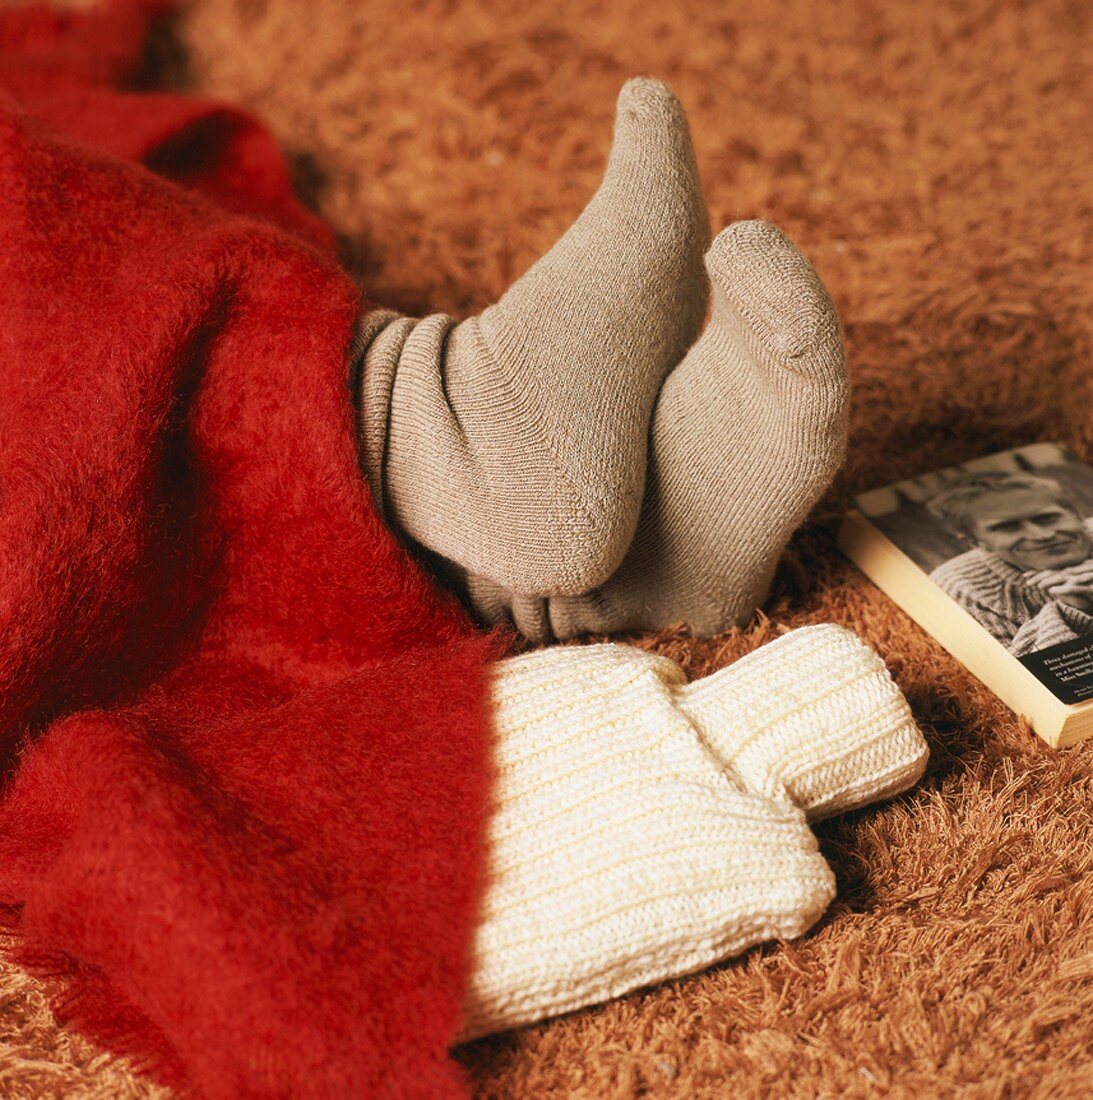 Feet in socks and hot water bottle peeping out from under blanket